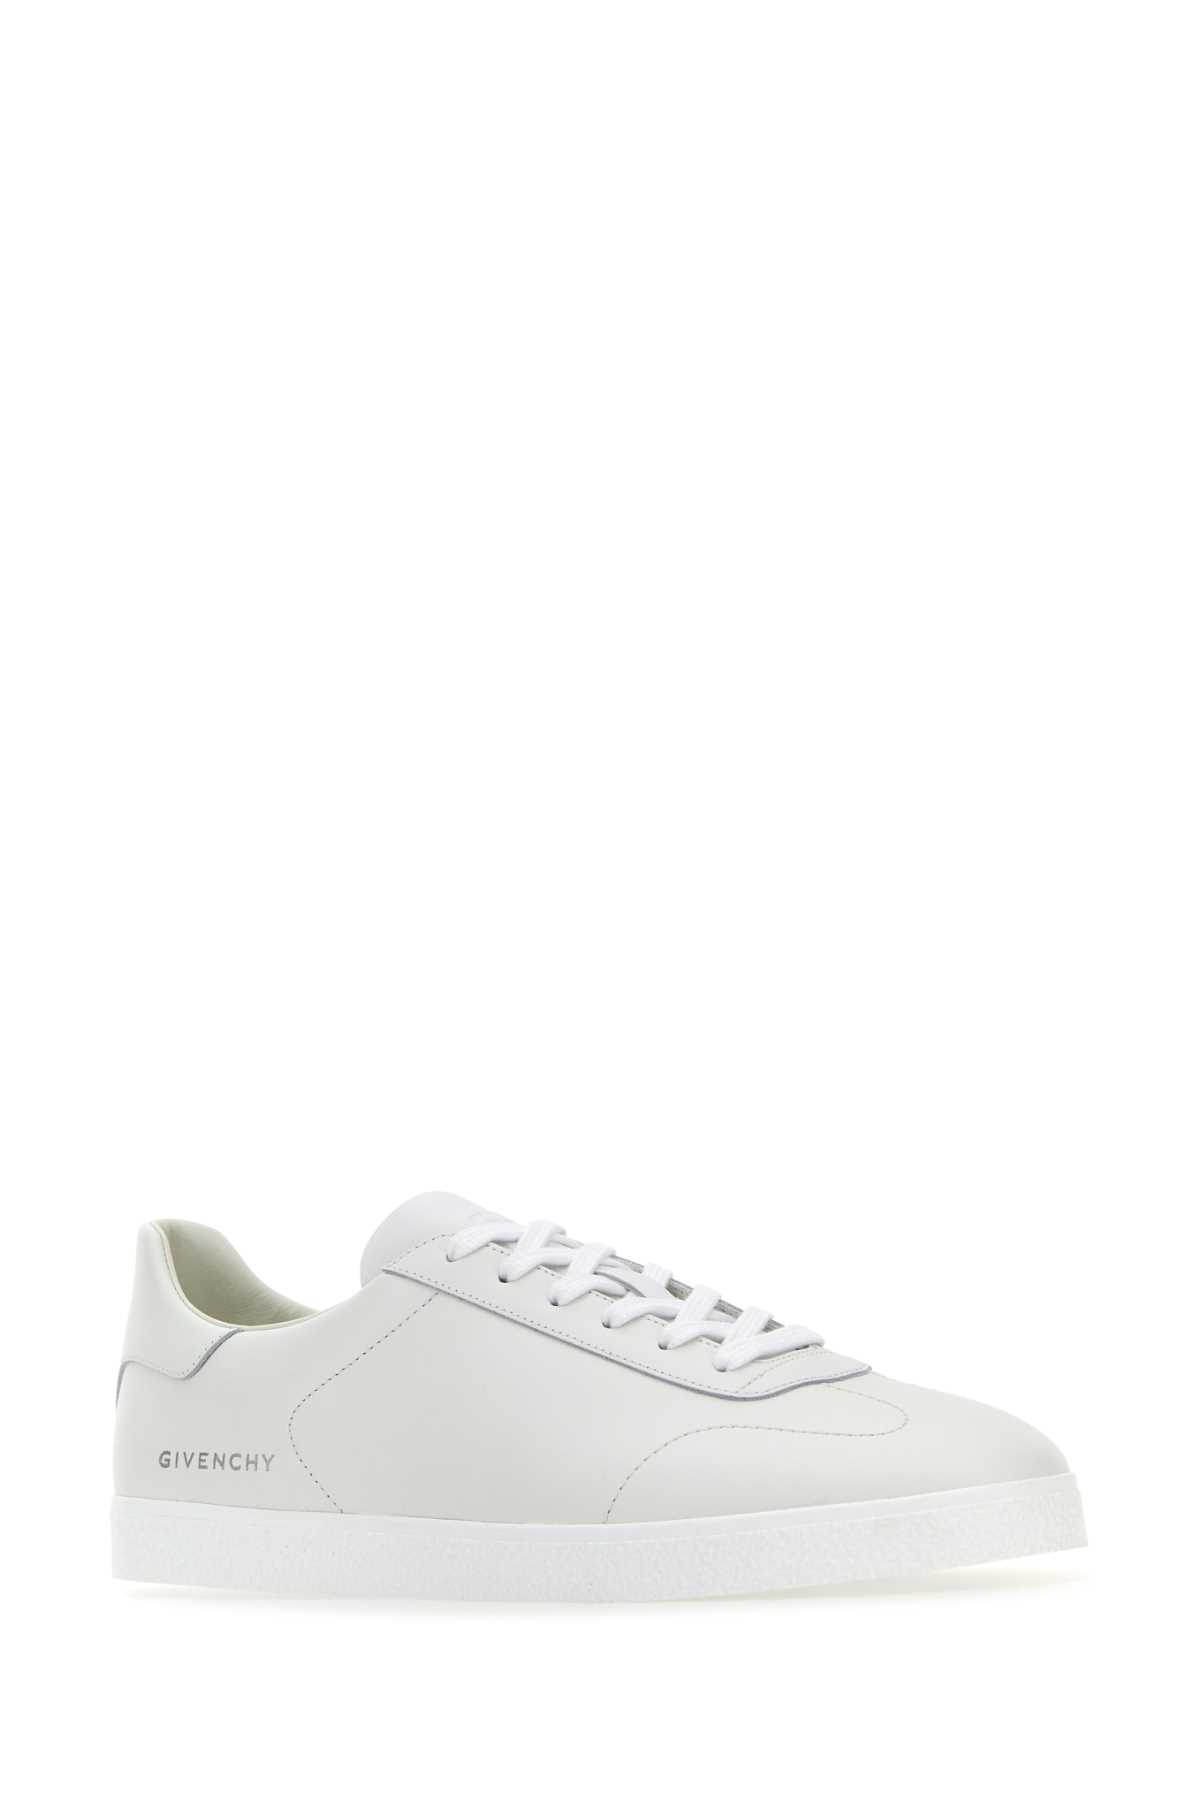 Shop Givenchy White Leather Town Sneakers